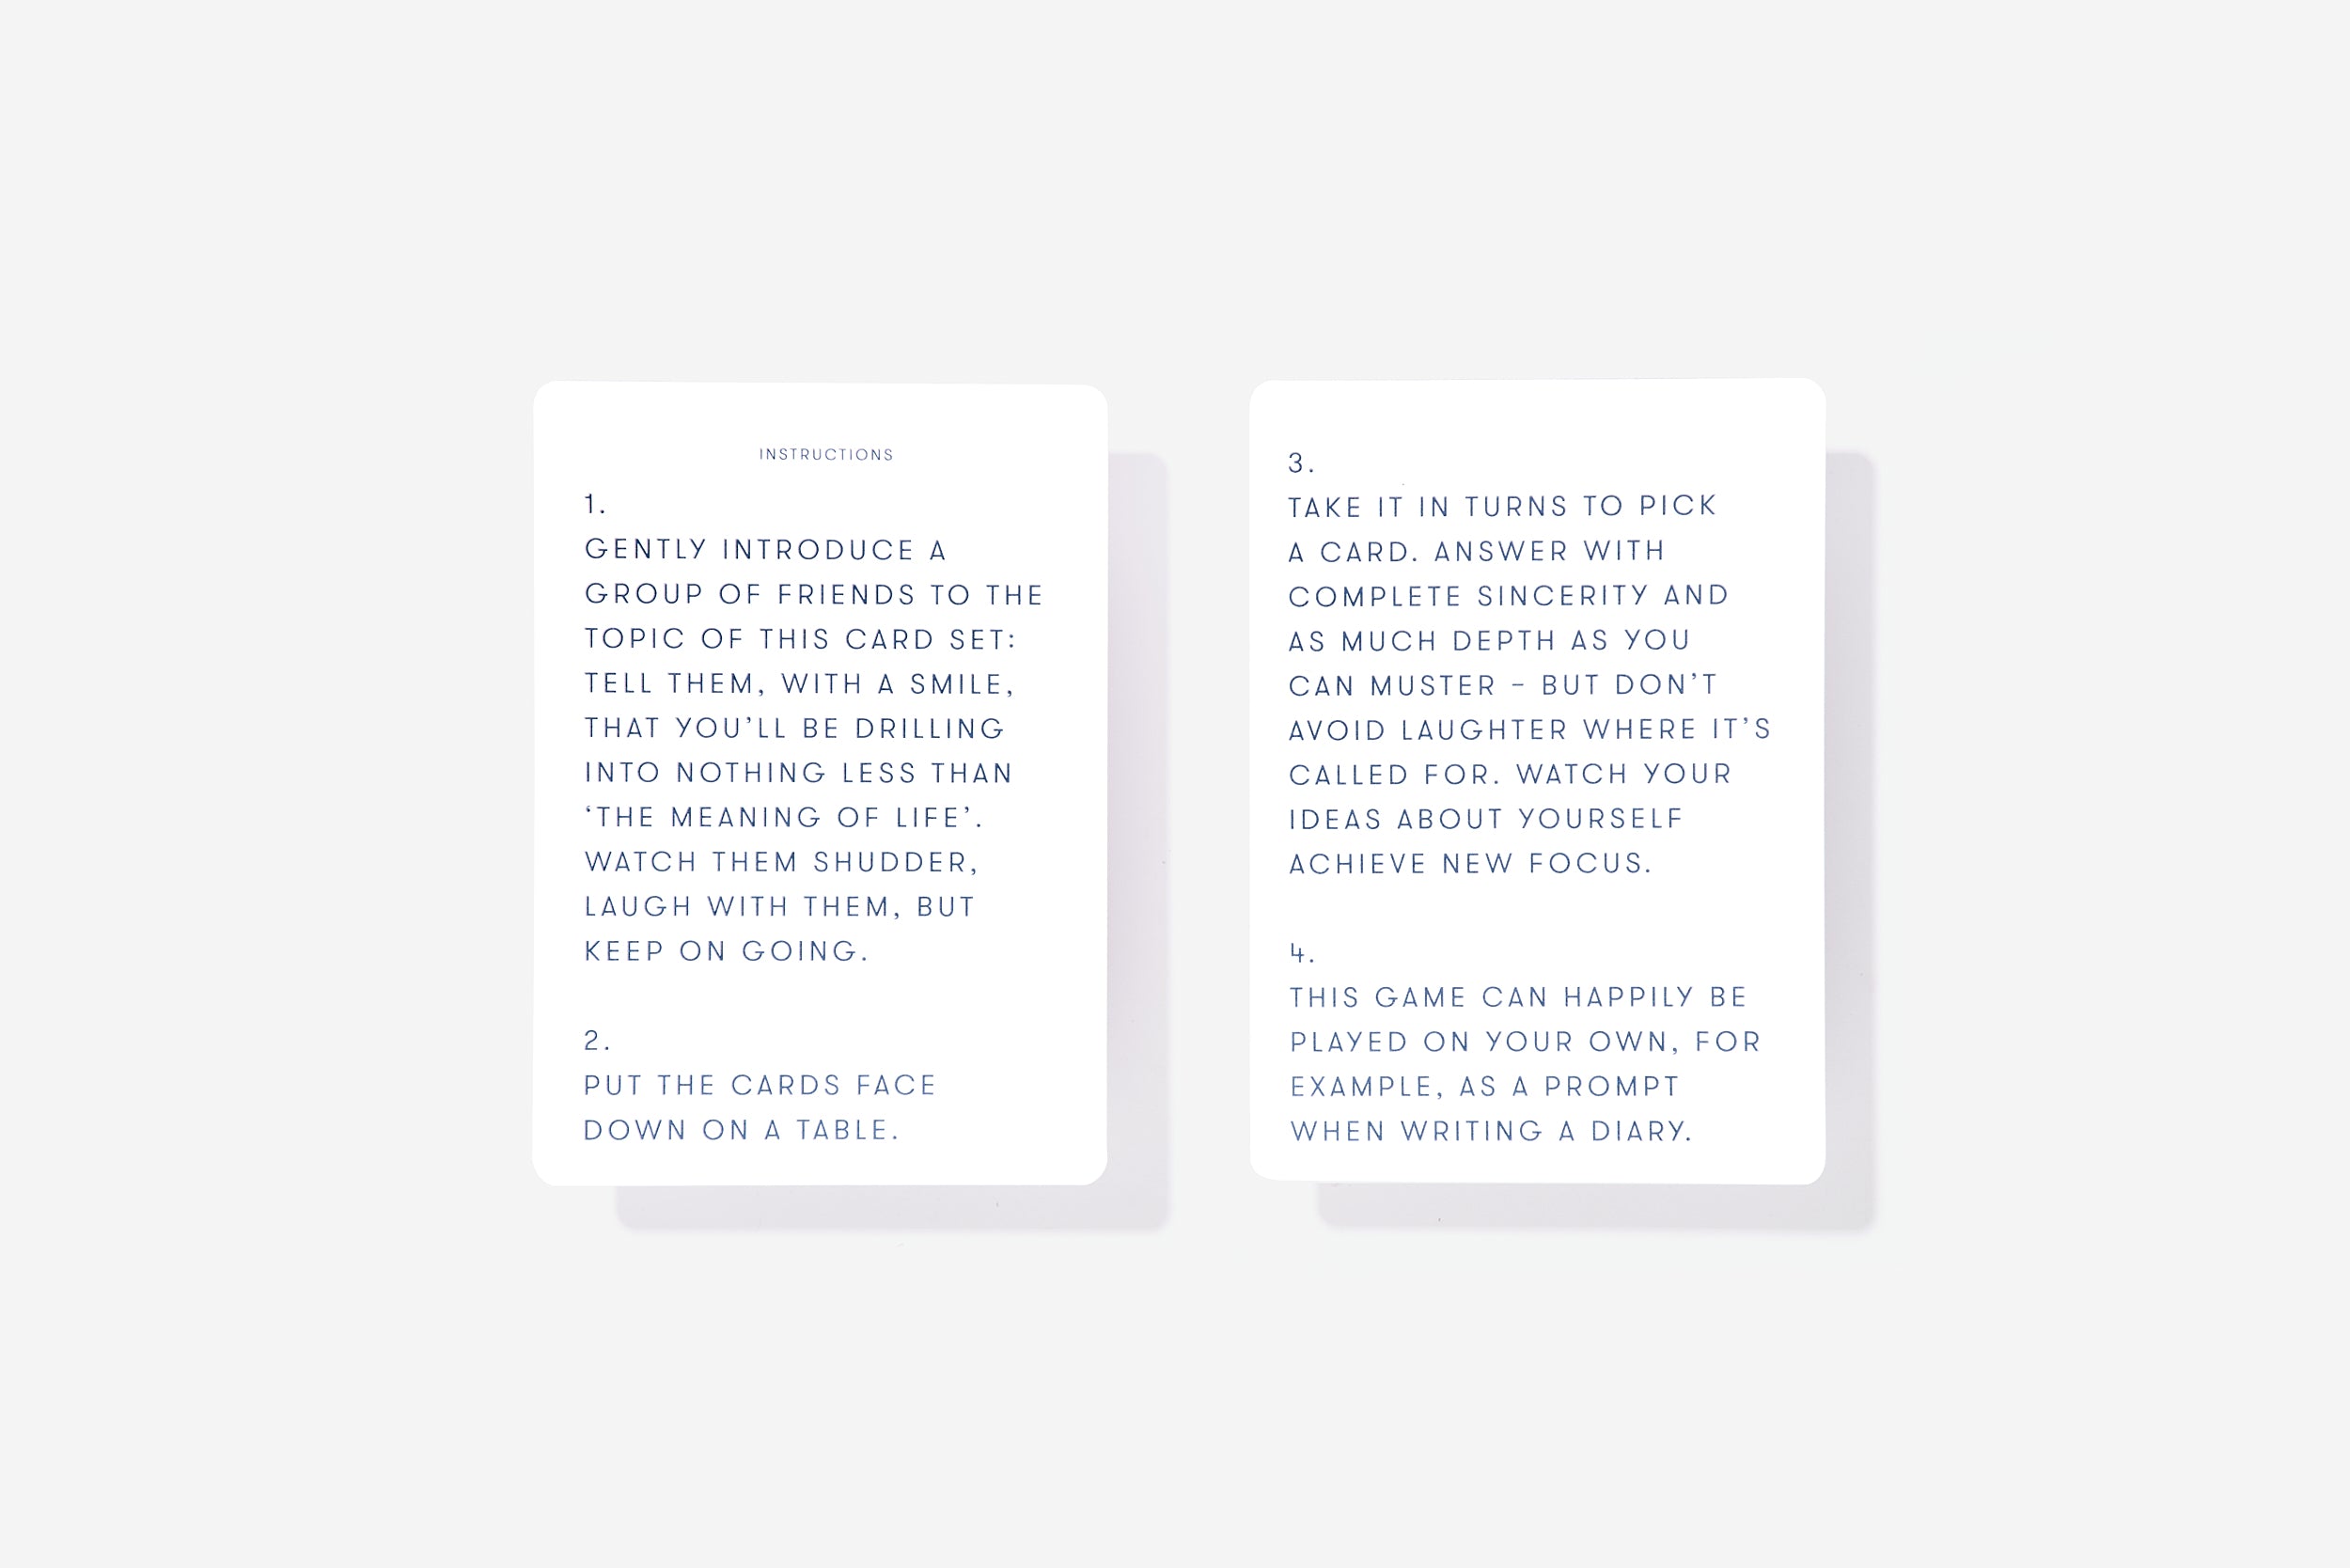 The Meaning of Life Cards